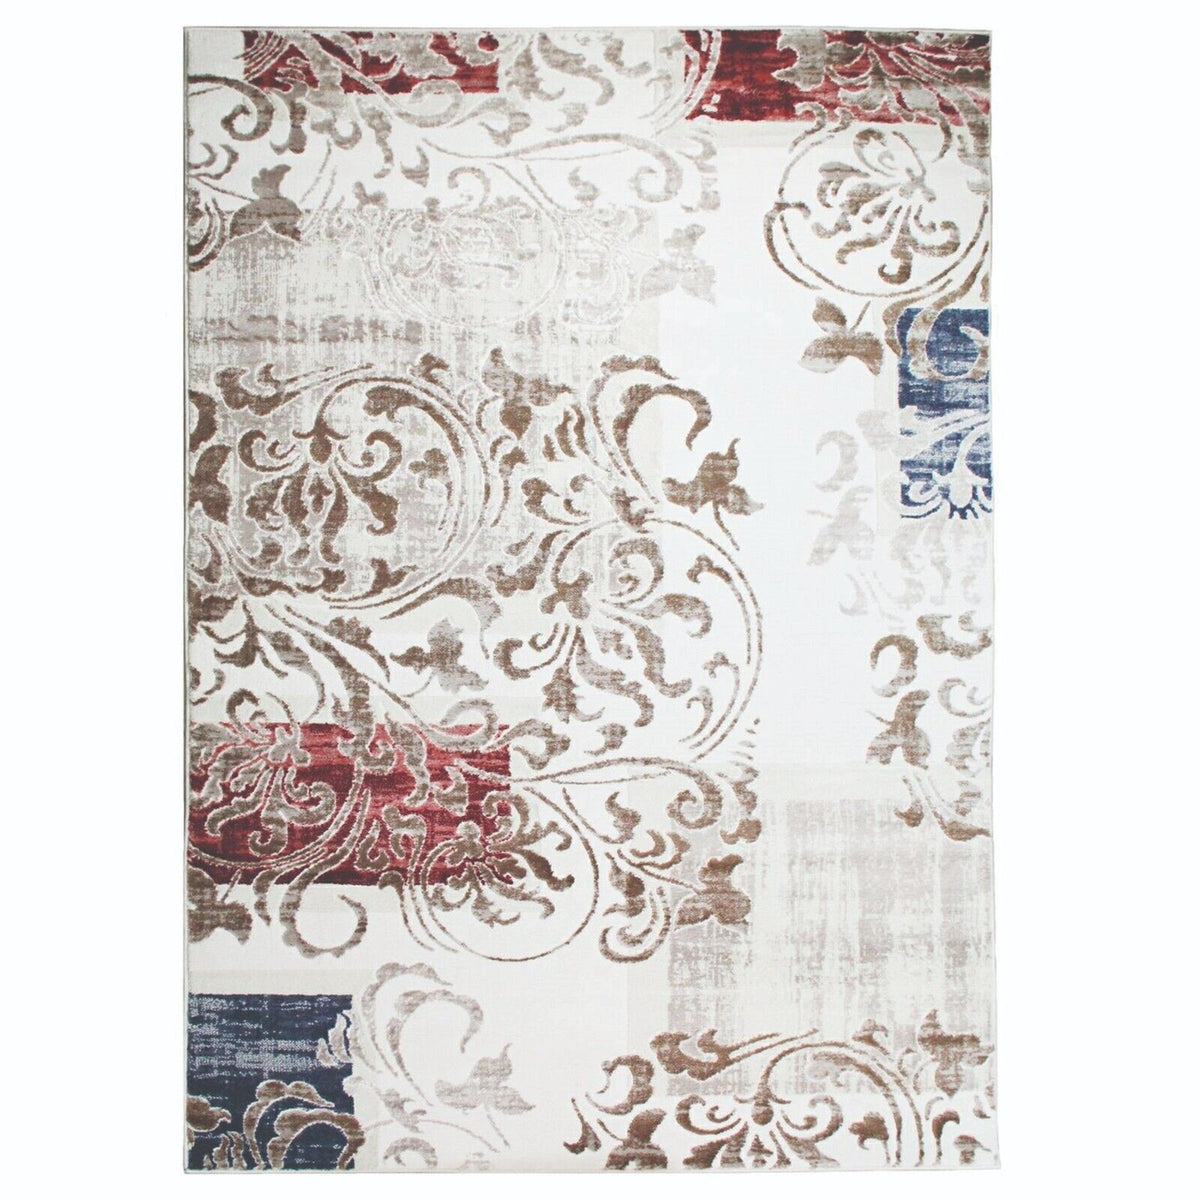 Storyville Modern Geometric Abstract Floral Scroll Area Rug or Runner - Cobalt Blue